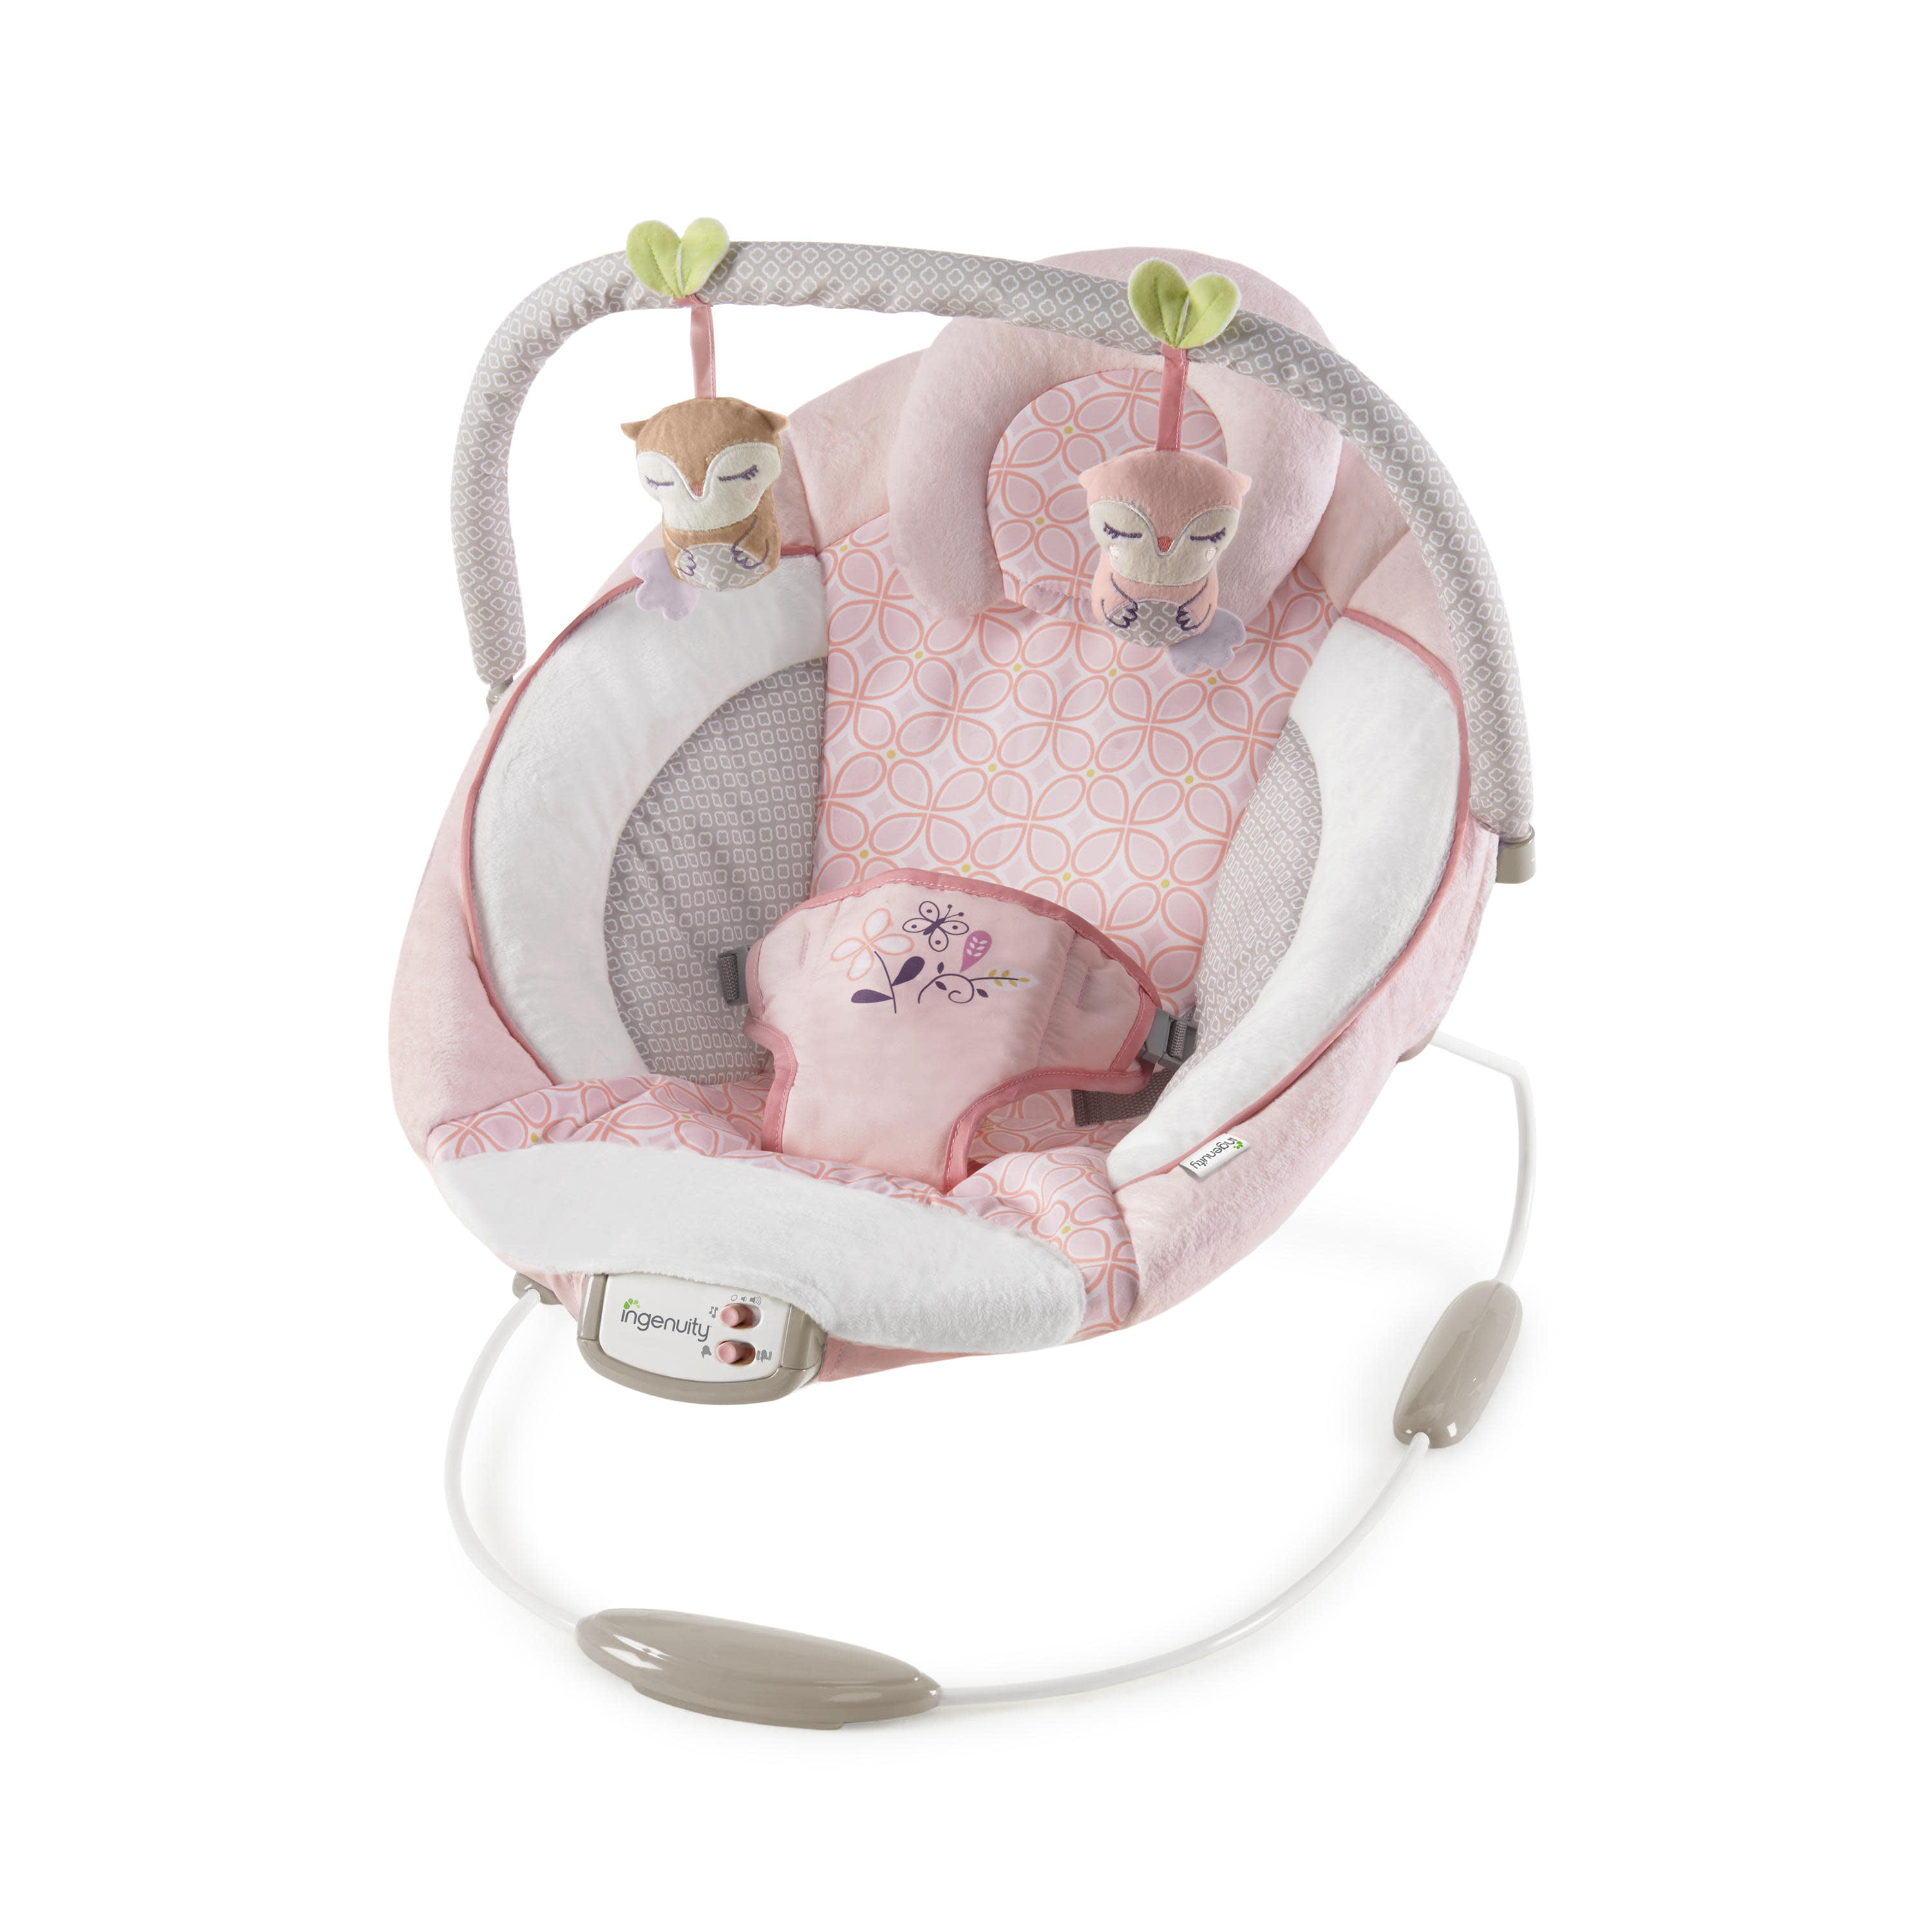 ingenuity baby bouncer chair